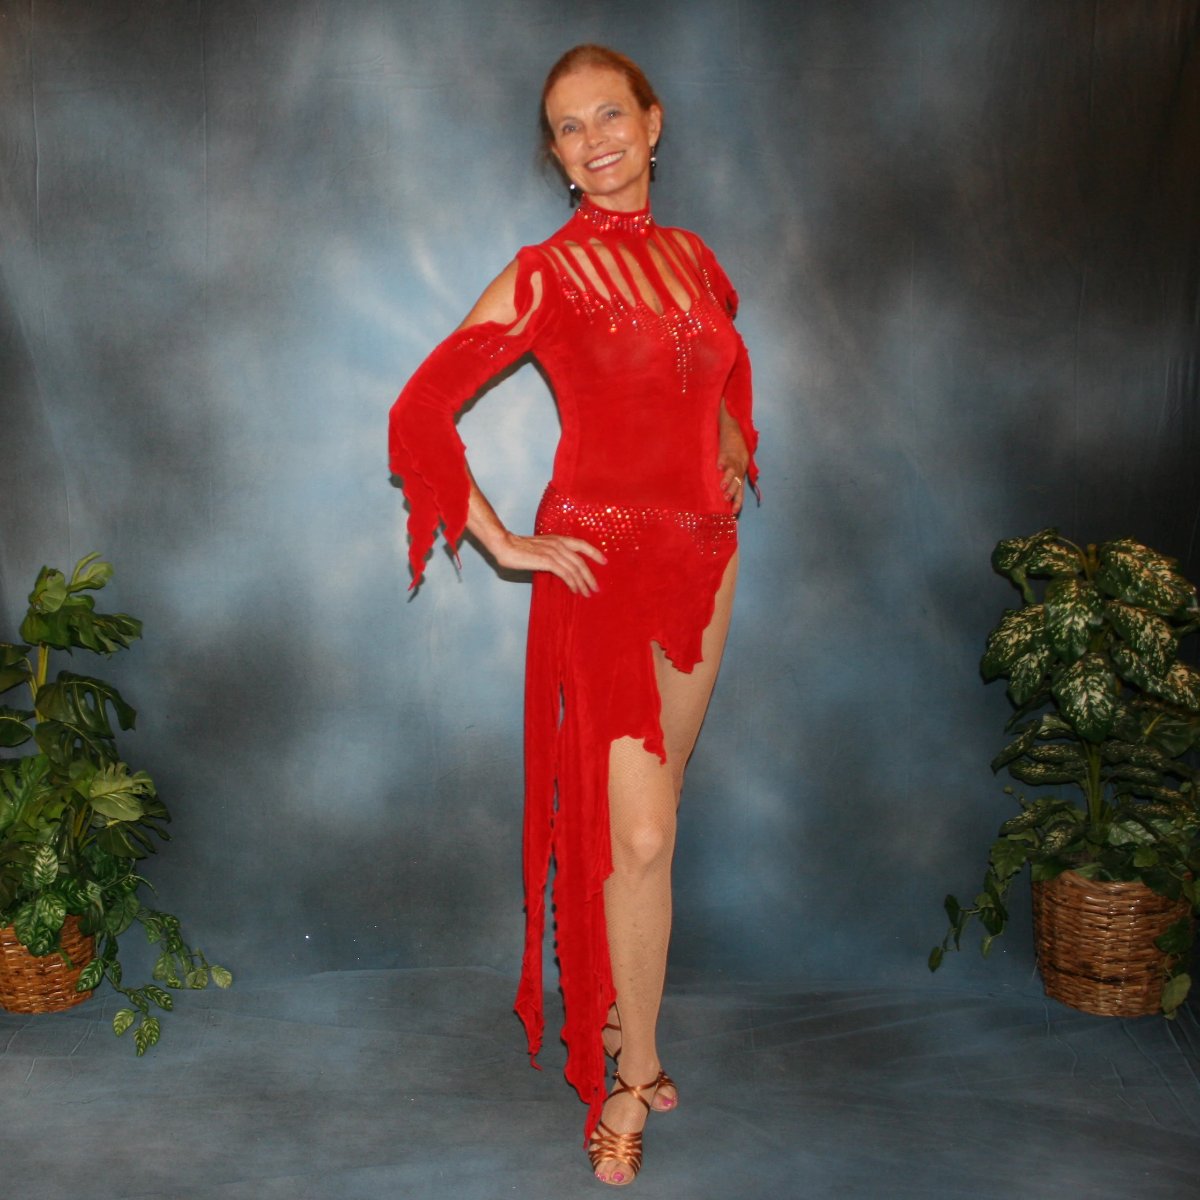 Crystal's Creations Red Latin/rhythm dress, which consists of a bodysuit, featuring cutouts in bodice with a keyhole back, 3/4 sleeves with details & Latin/rhythm skirt, was created in luxurious red solid slinky embellished with light siam Swarovski rhinestone work.